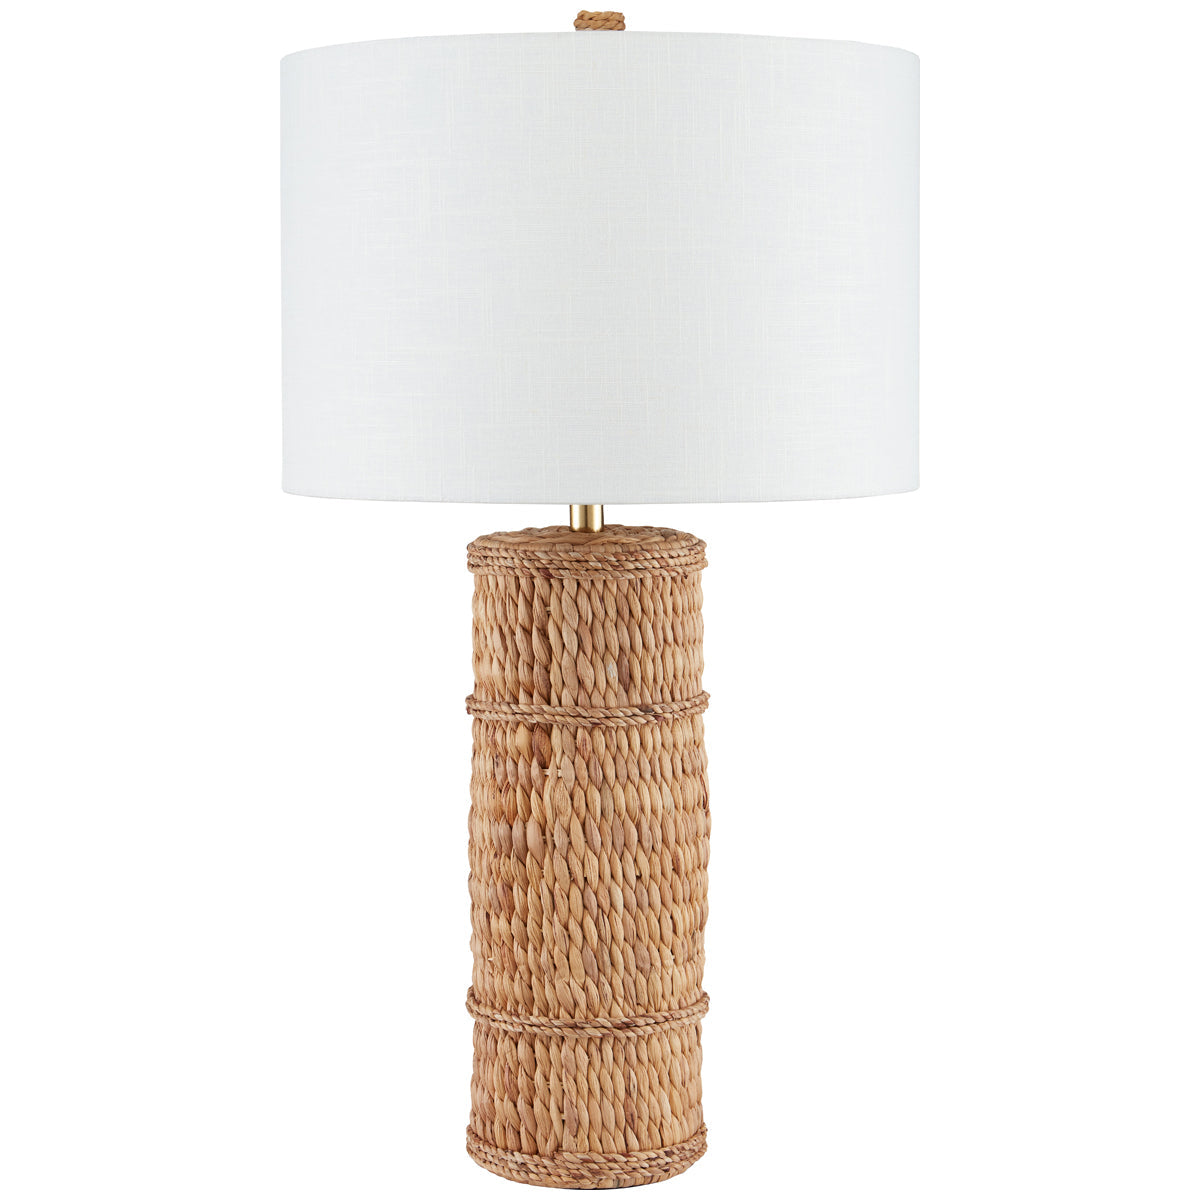 Currey and Company Azores Table Lamp